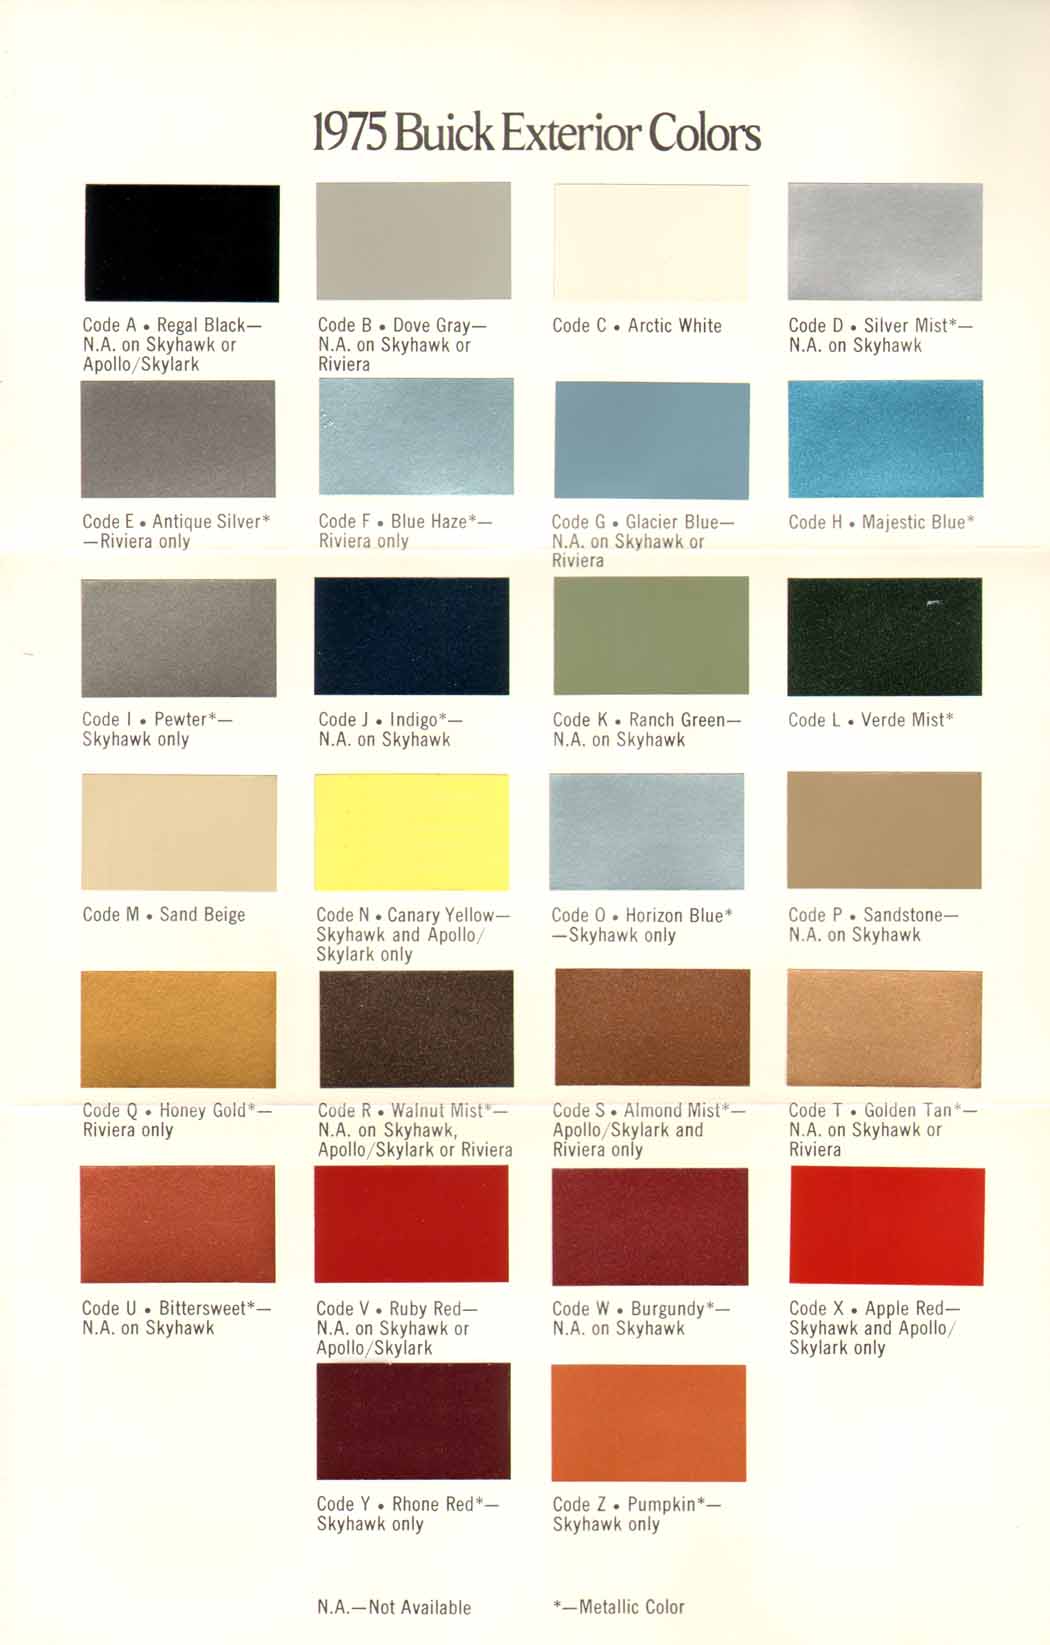 1975 Buick Colors-02-03-04